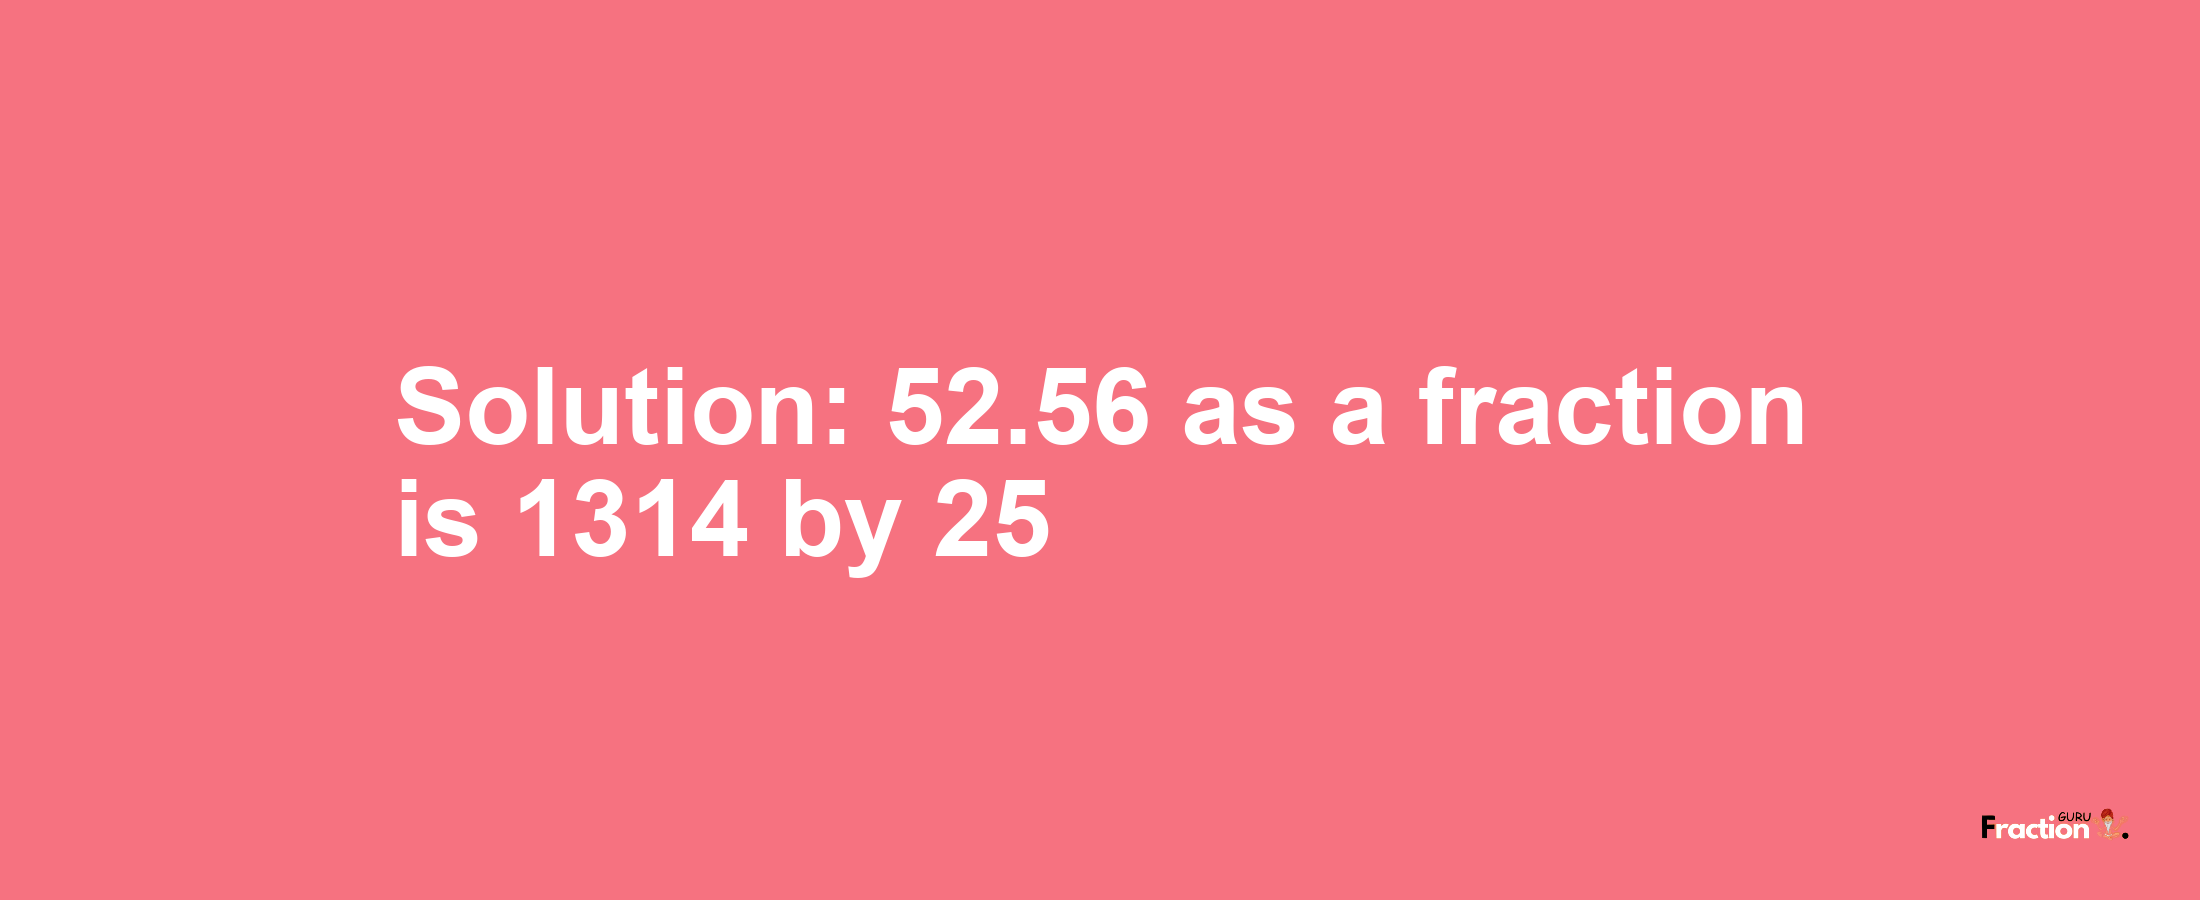 Solution:52.56 as a fraction is 1314/25